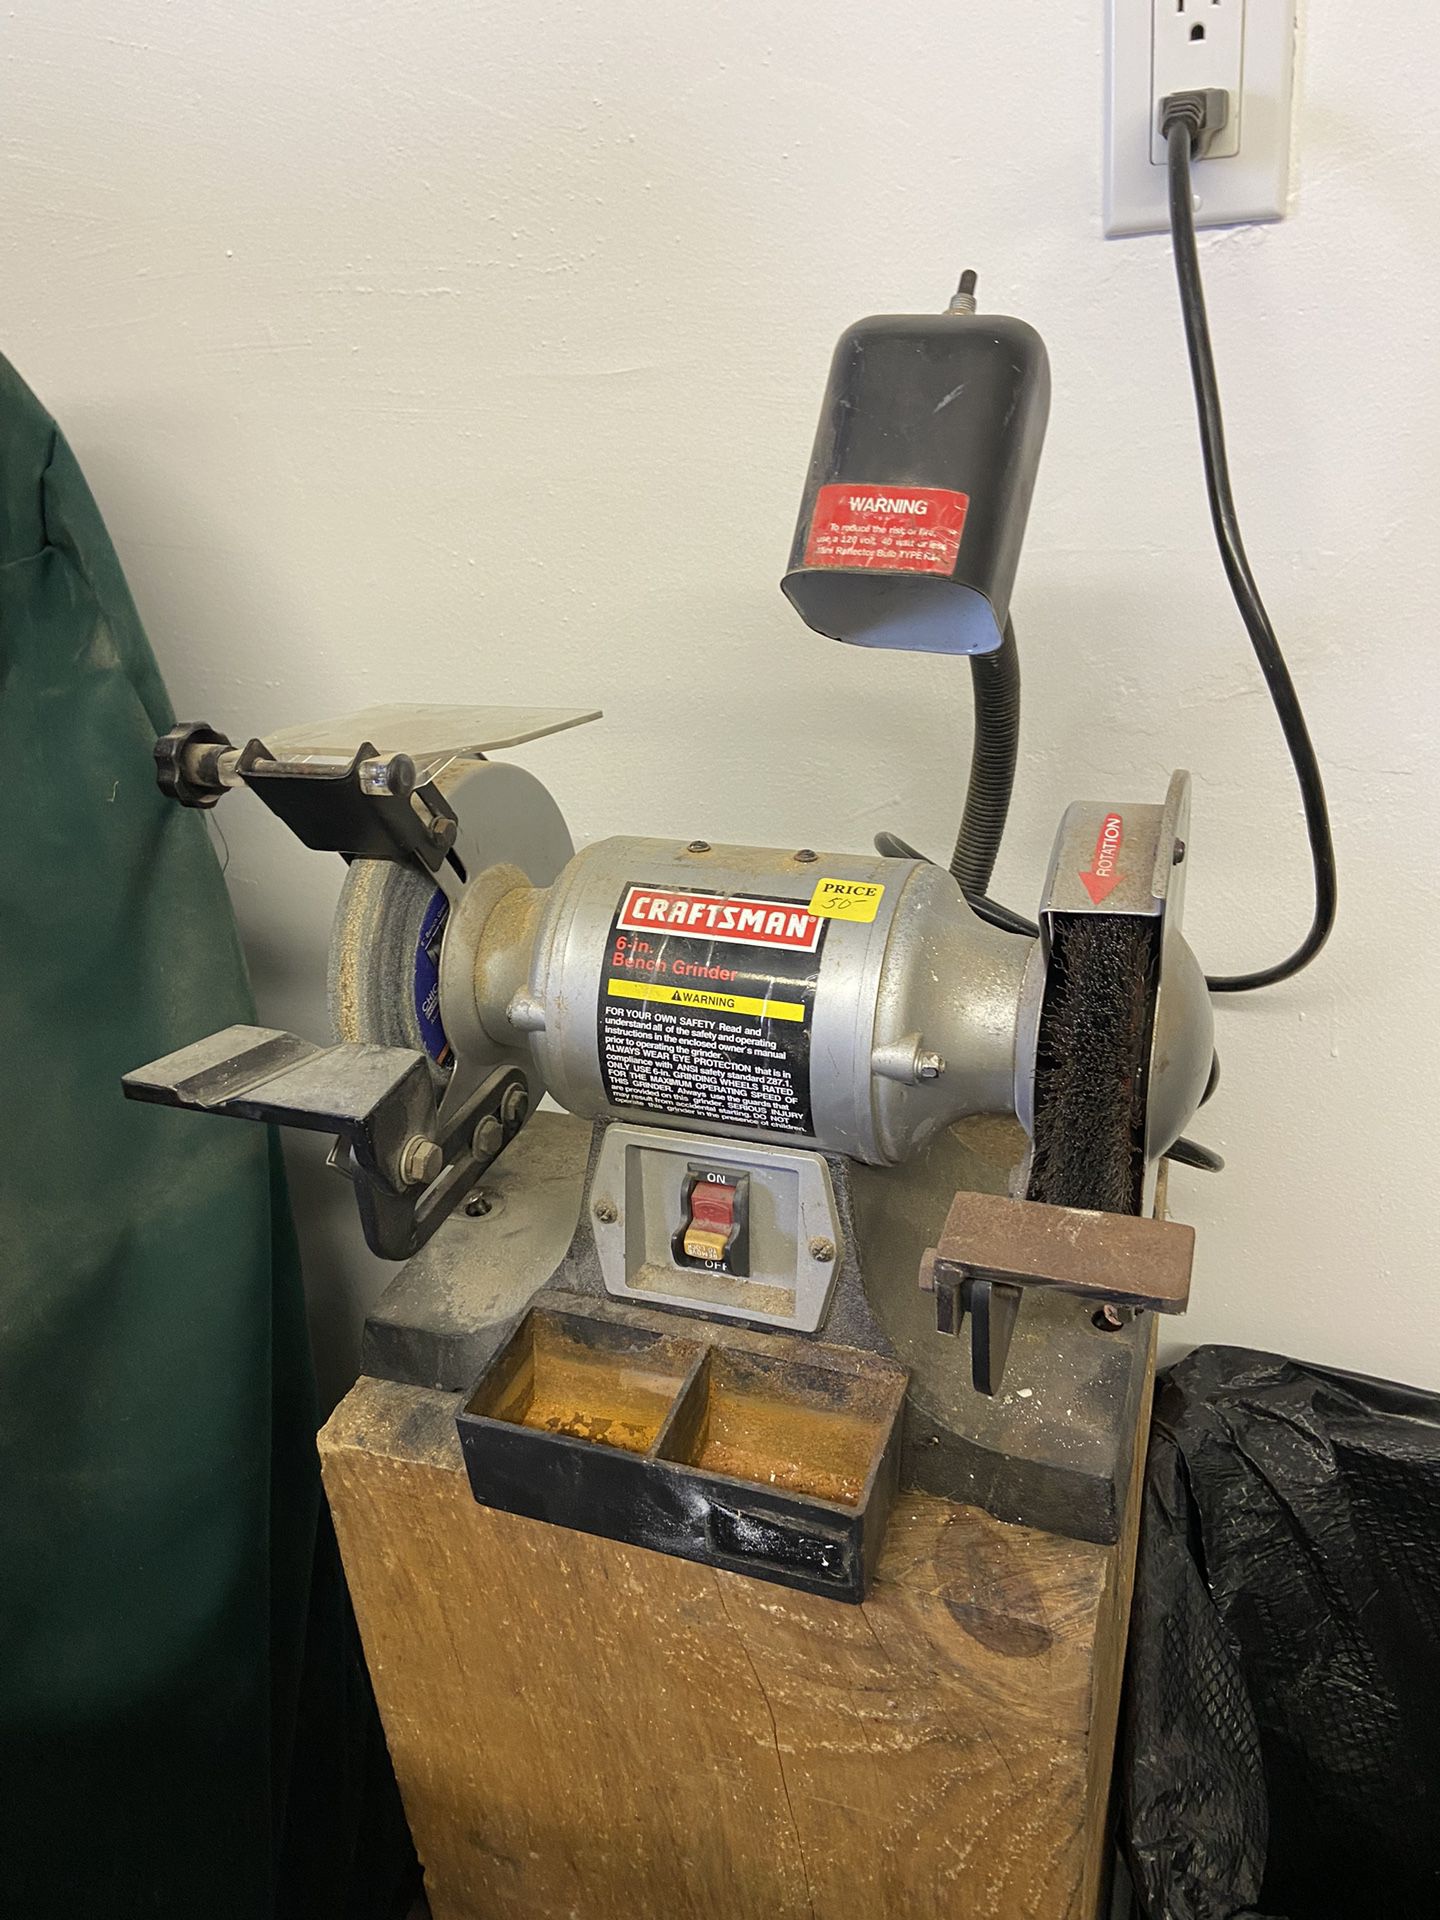 Craftsman 6” Bench Grinder with Grinding & wire Brush Wheels